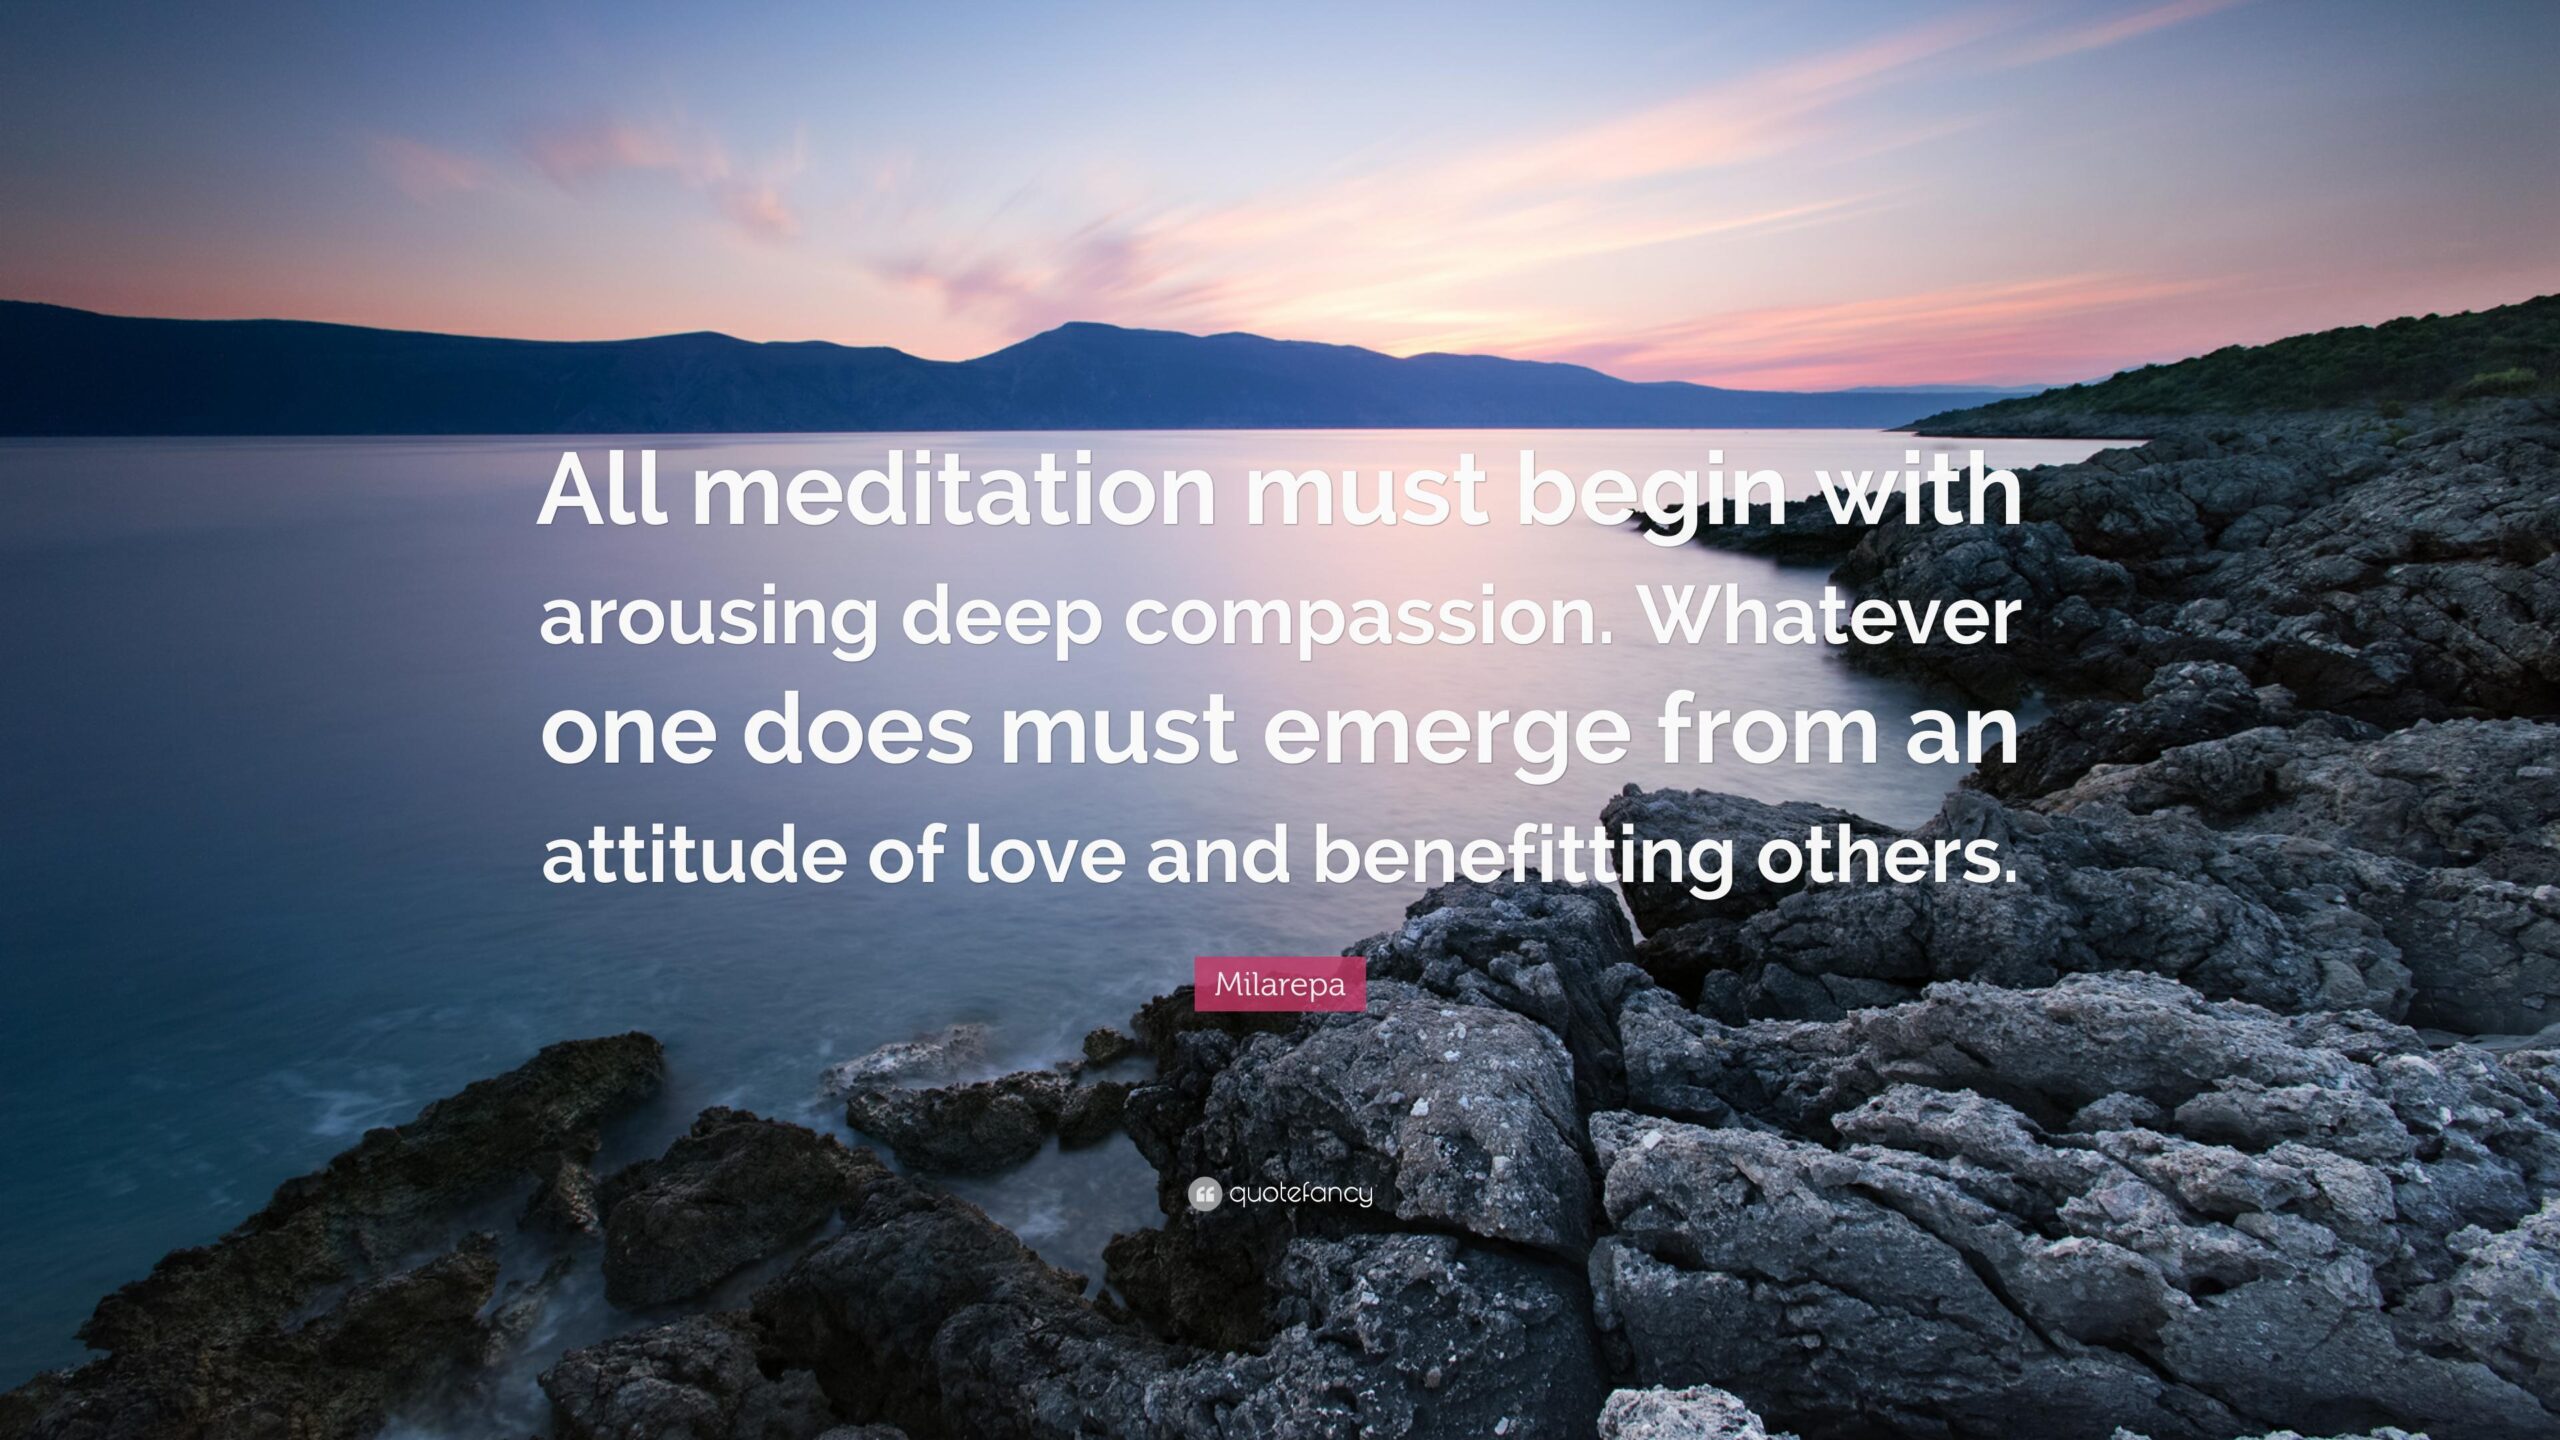 Milarepa Quote “All meditation must begin with arousing deep